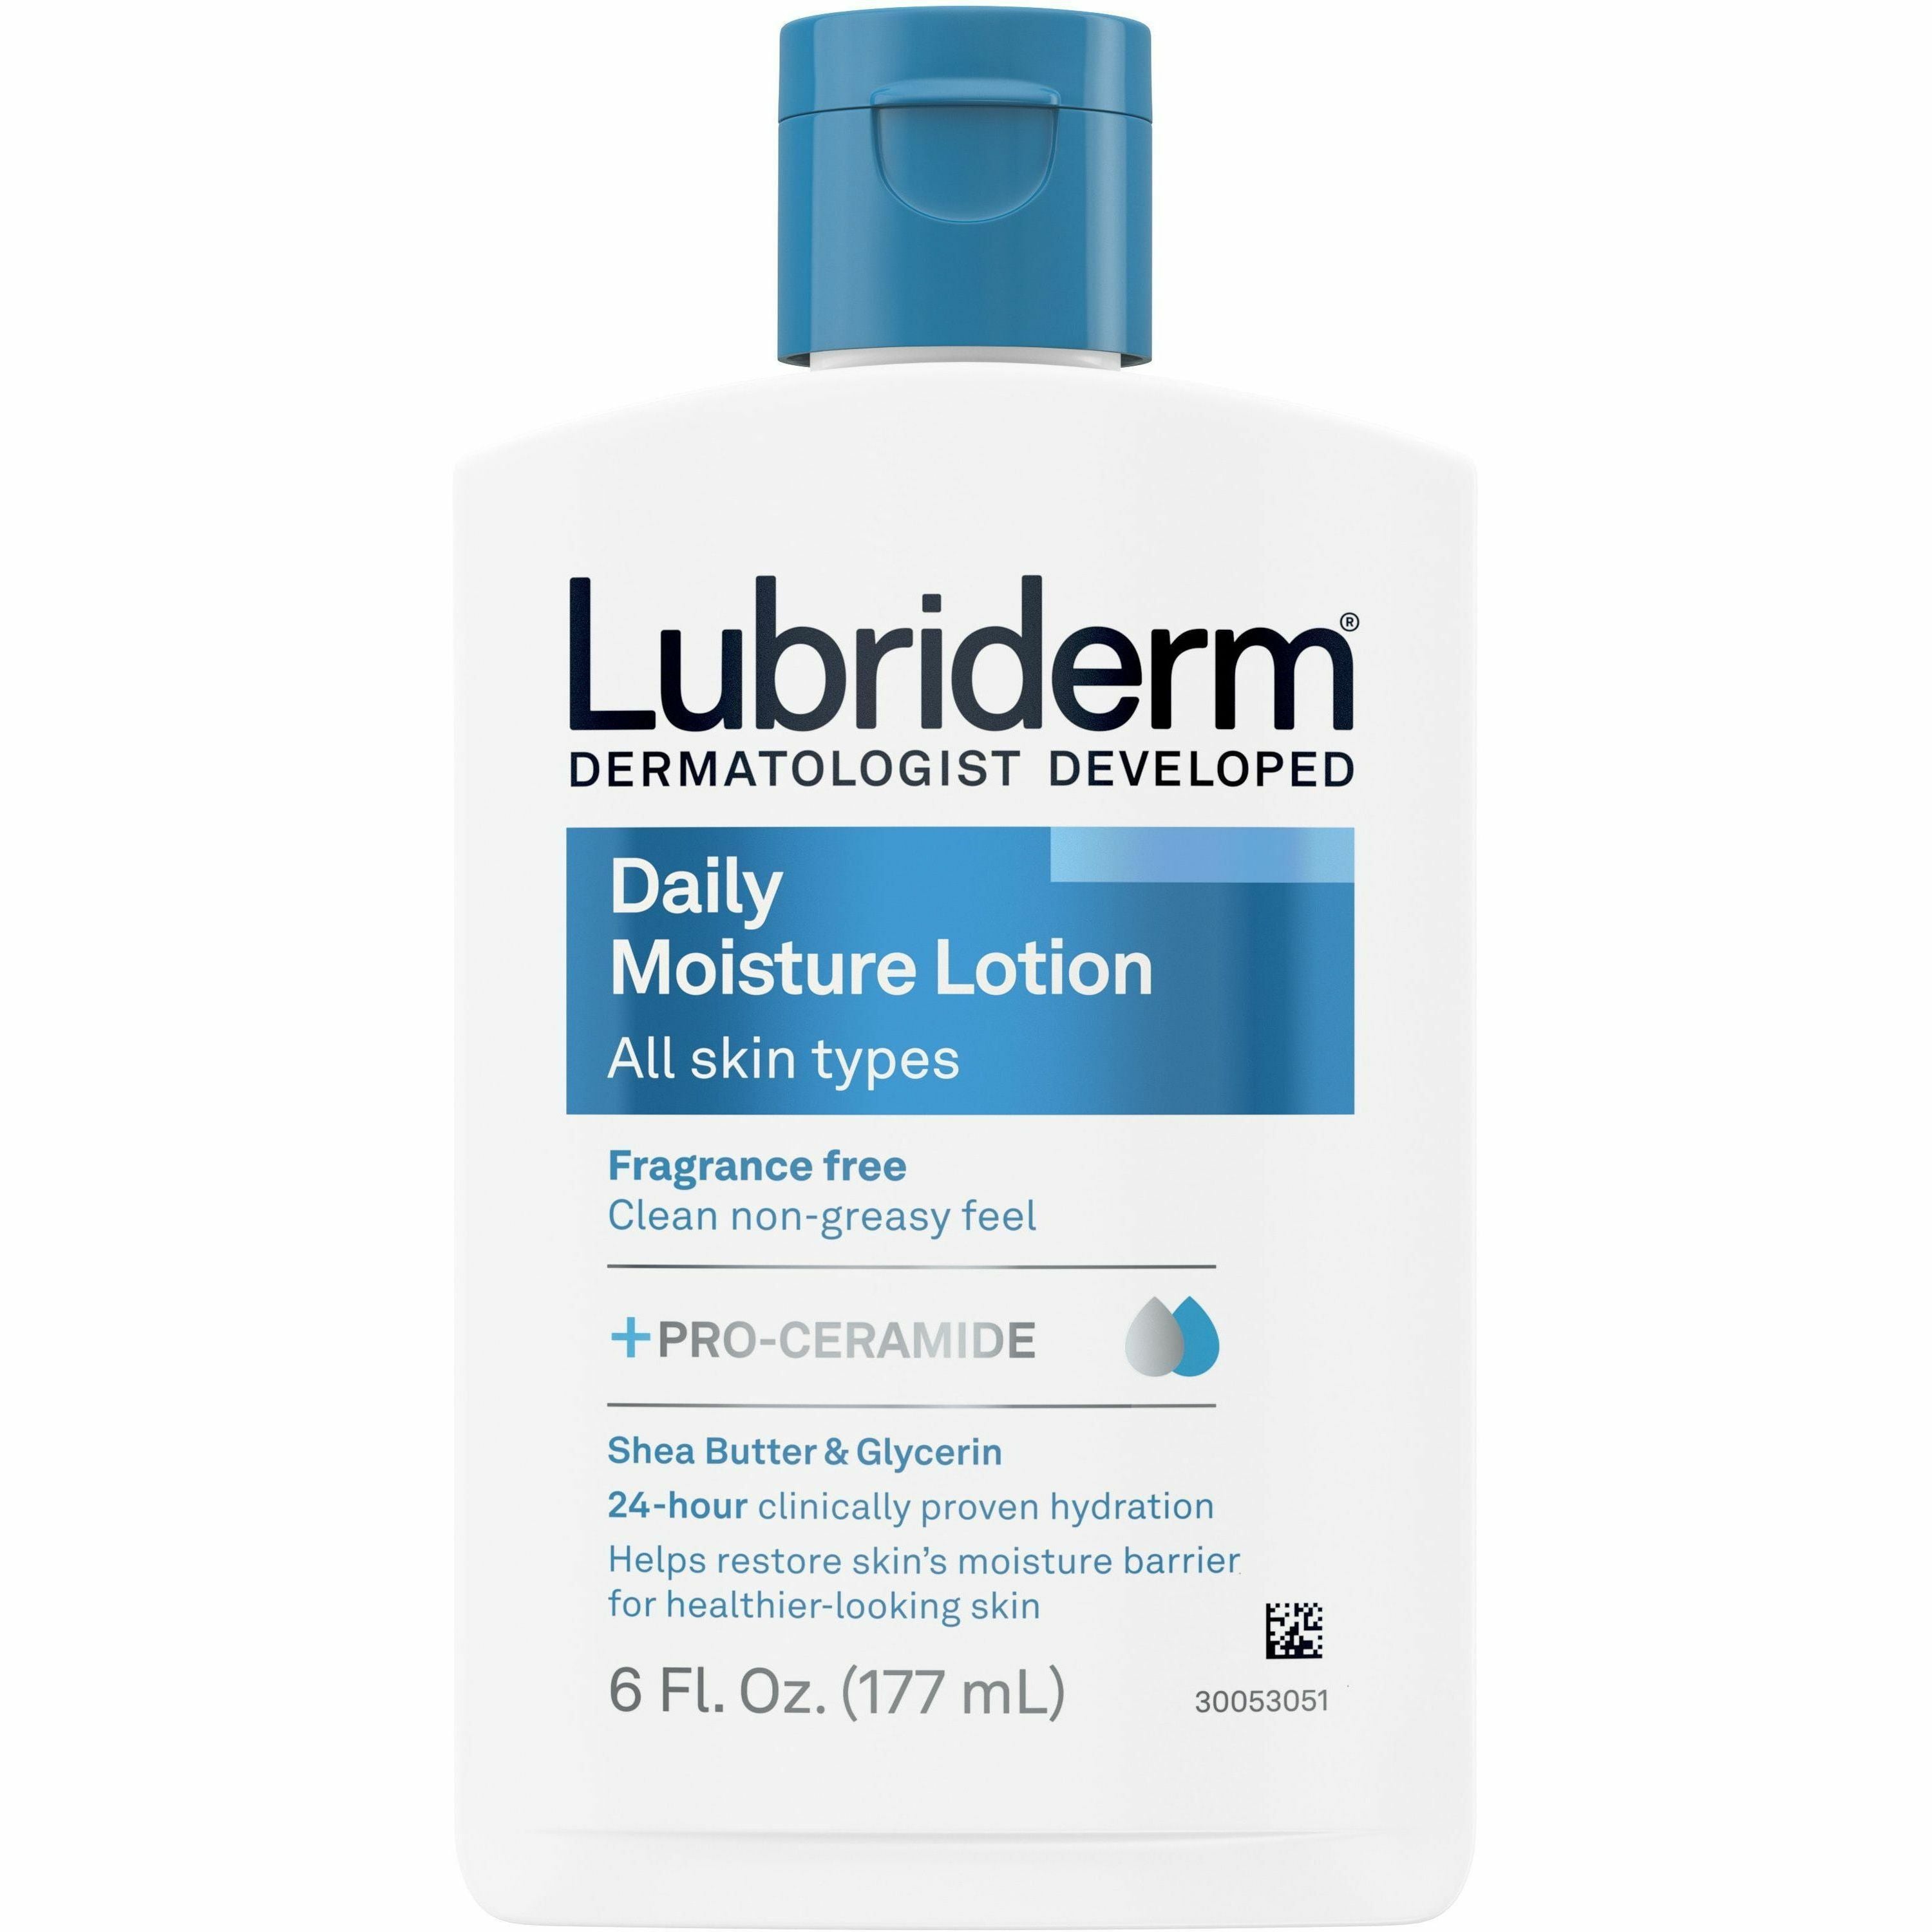 lubriderm-daily-moisture-skin-lotion-lotion-6-fl-oz-non-fragrance-flip-top-dispenser-for-dry-skin-applicable-on-hand-and-body-fragrance-free-moisturising-non-greasy-1-each_joj48826 - 1